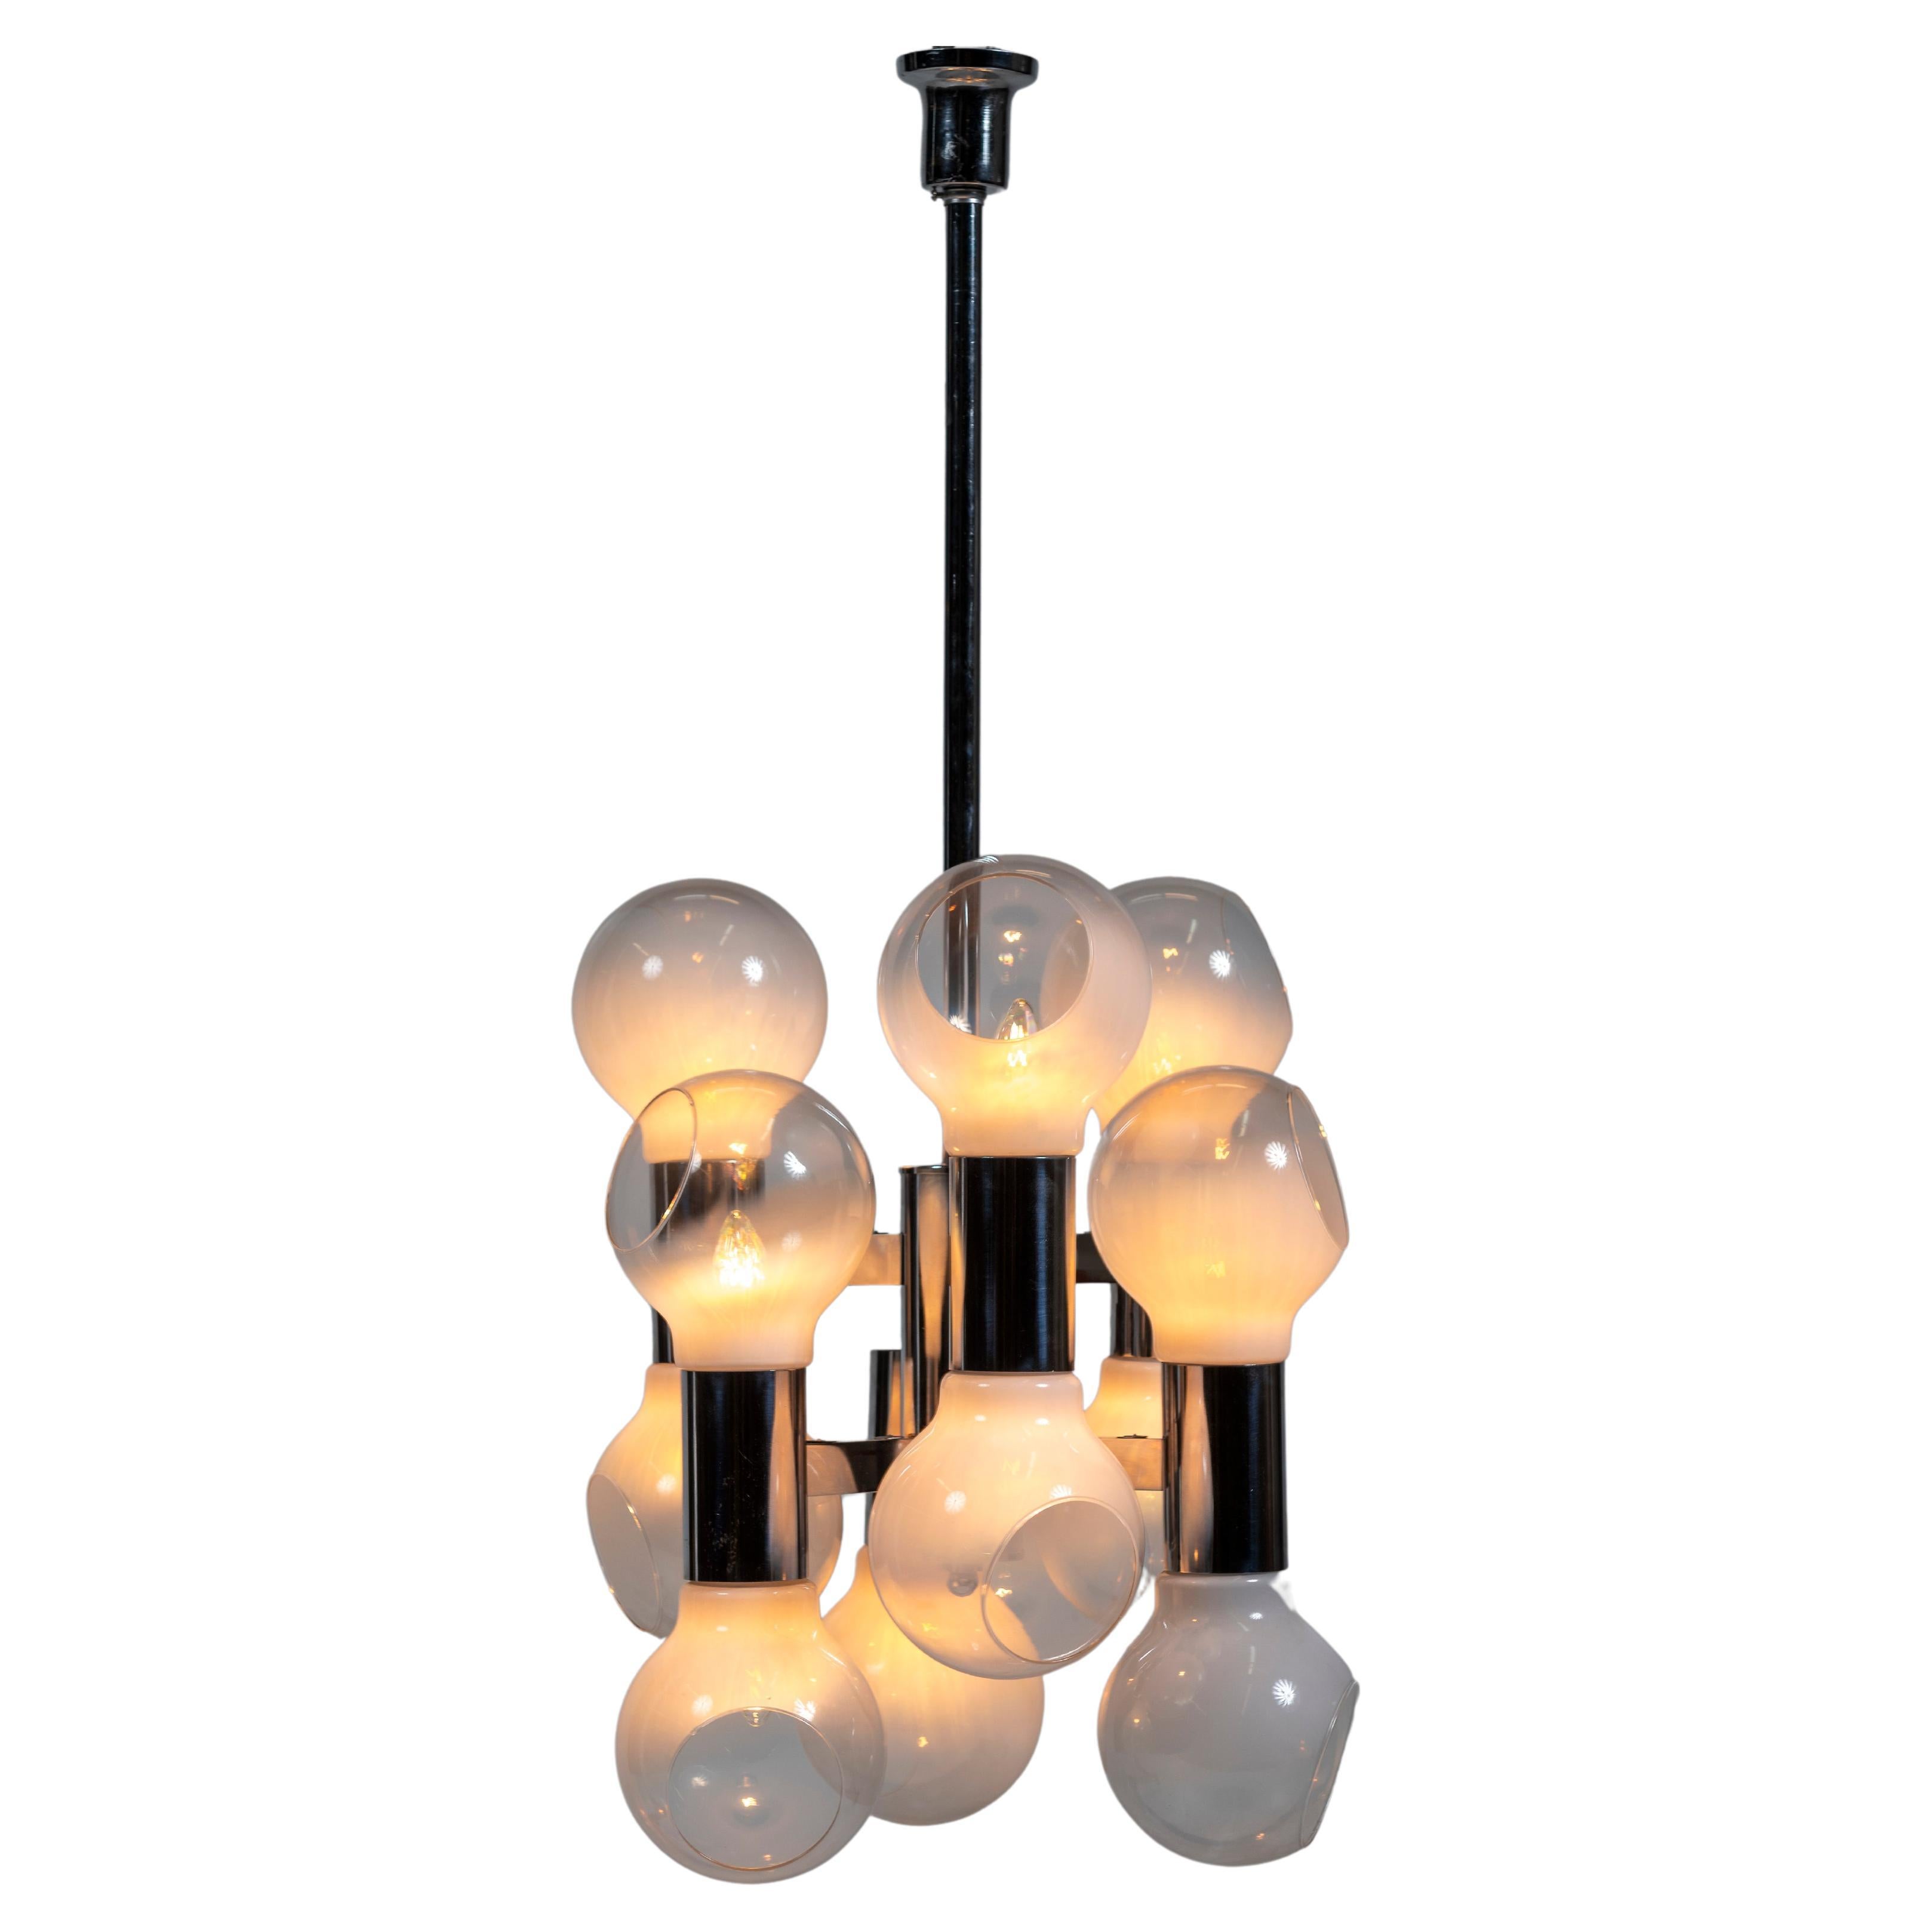 Reggiani has been recognized as a leader in modern lighting design since the mid 1950s. This vintage Italian statement chandelier has eight blown glass globes suspended from a chrome fixture. Timeless and bold, this piece creates an interesting glow